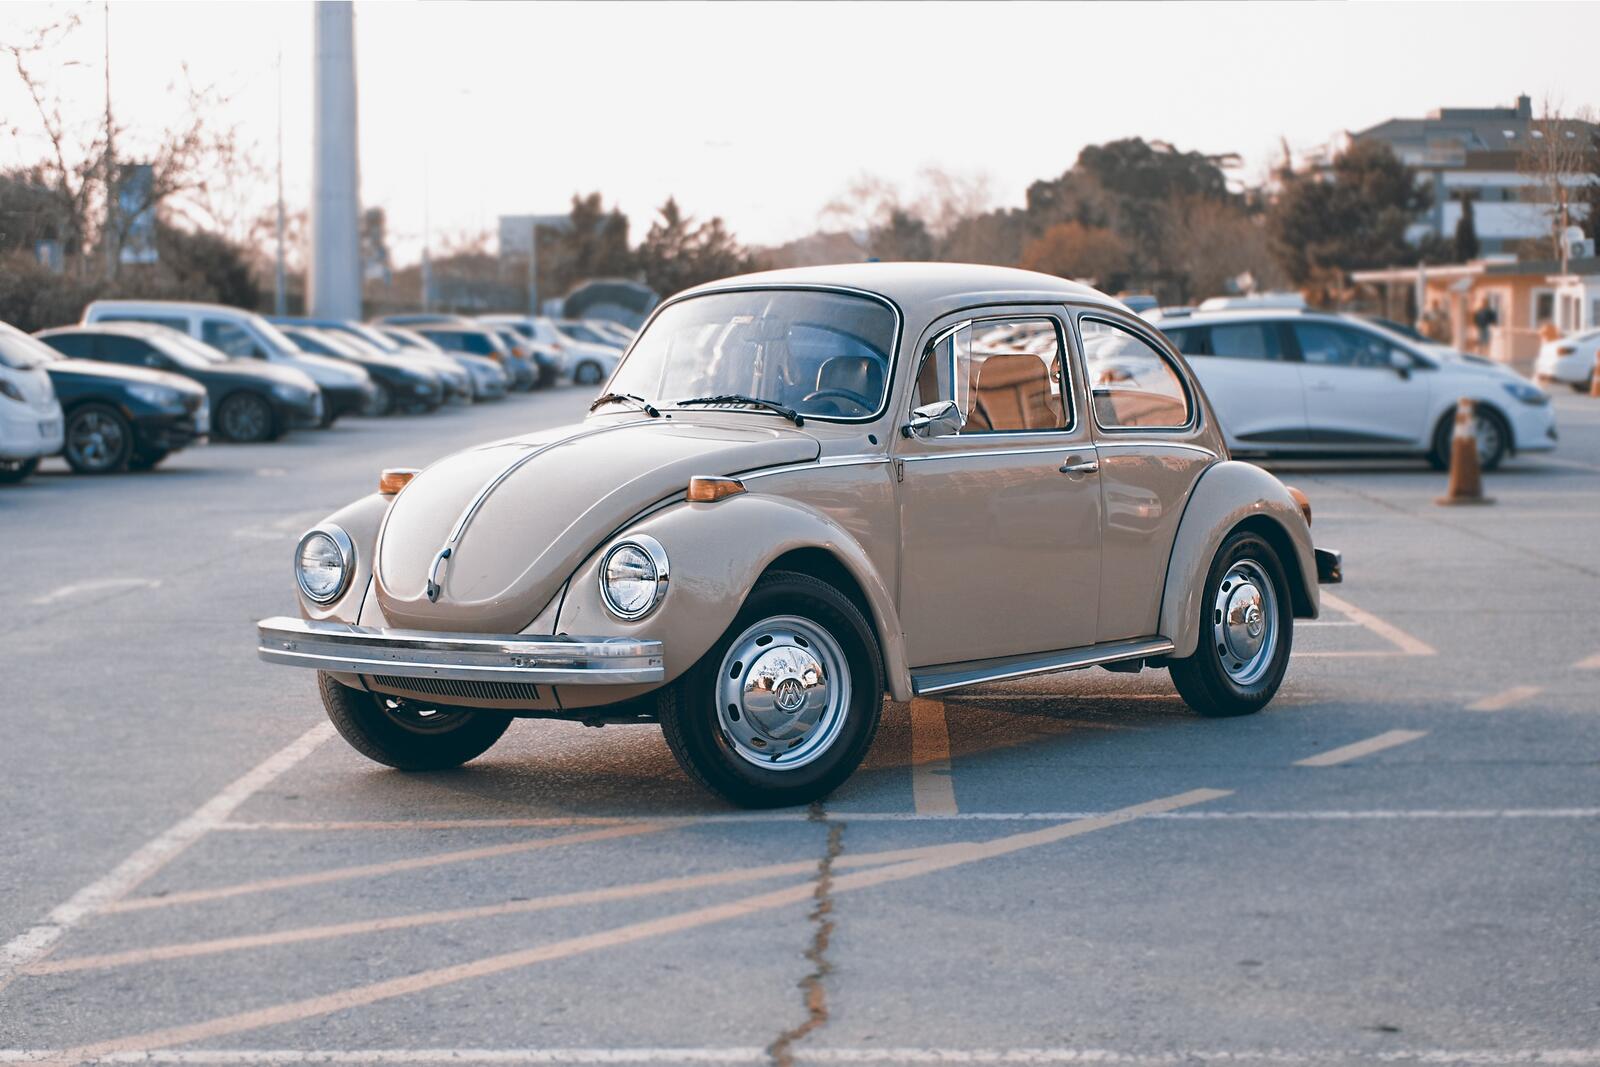 Free photo The Volkswagen Beetle is parked in the parking lot.